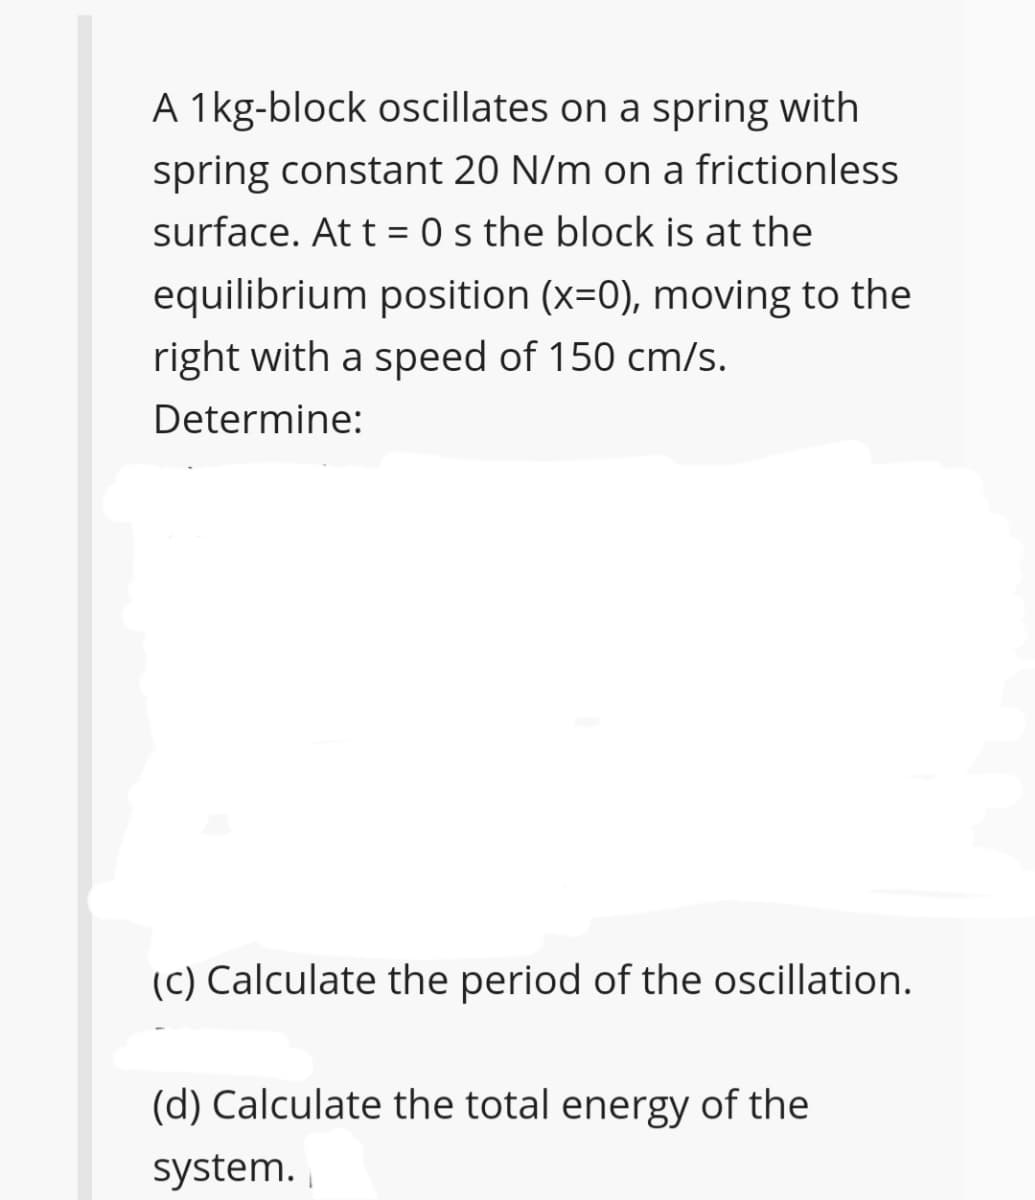 A 1kg-block oscillates on a spring with
spring constant 20 N/m on a frictionless
surface. At t = 0 s the block is at the
equilibrium position (x=0), moving to the
right with a speed of 150 cm/s.
Determine:
(C) Calculate the period of the oscillation.
(d) Calculate the total energy of the
system.
